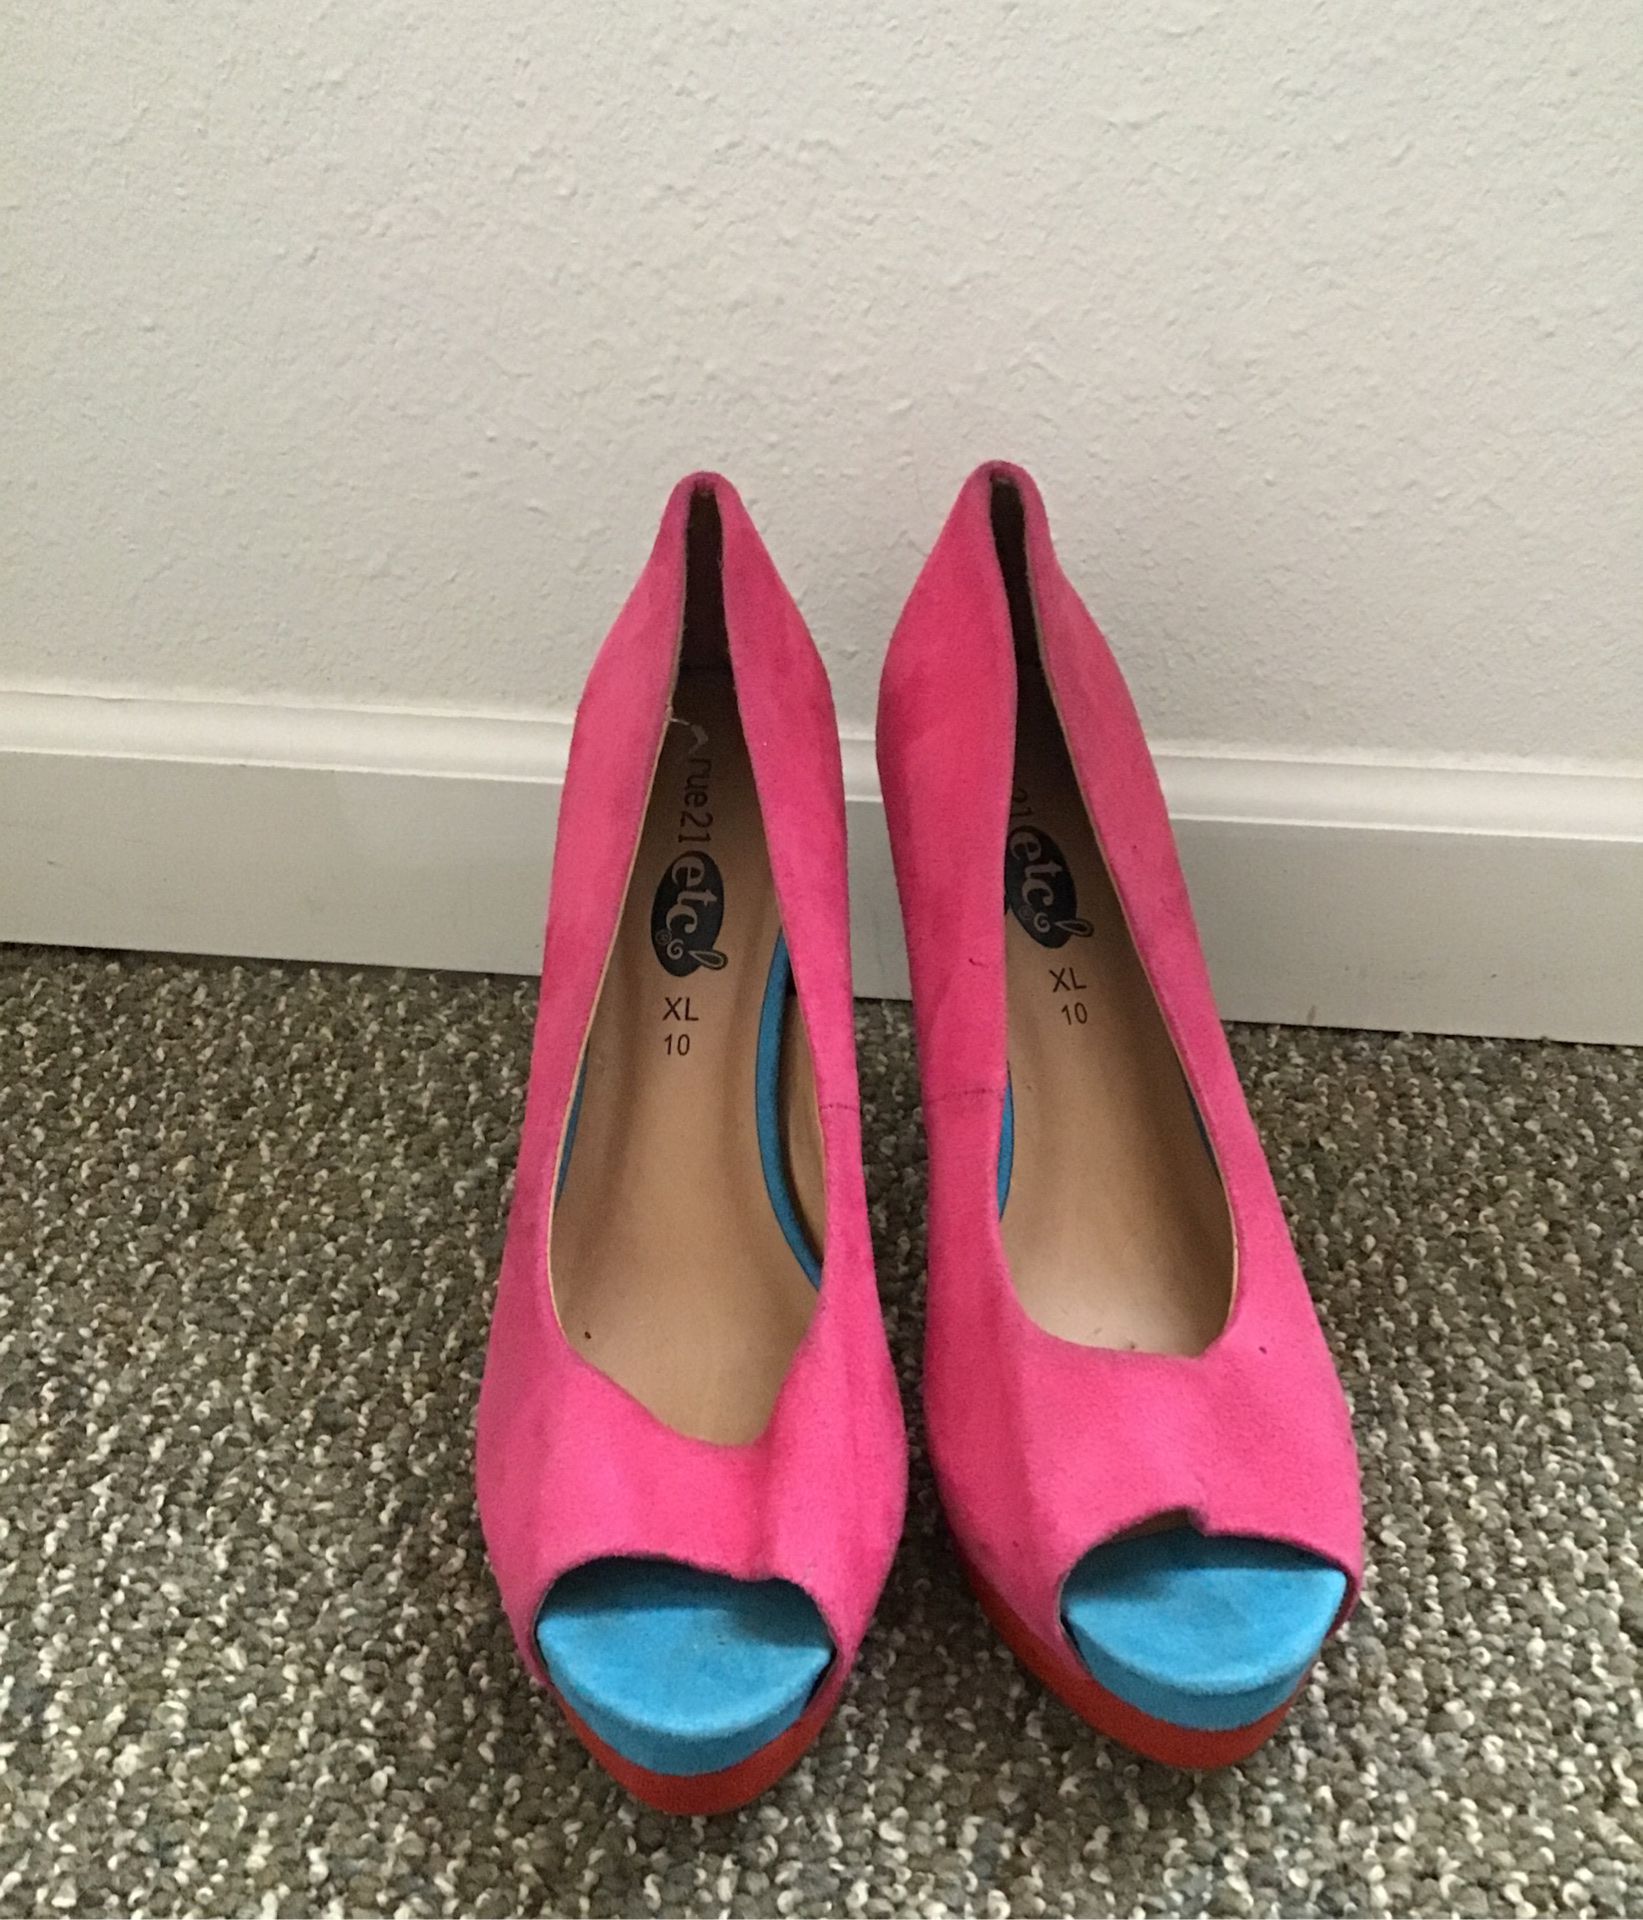 Rue 21 Pink Red and Blue Heels